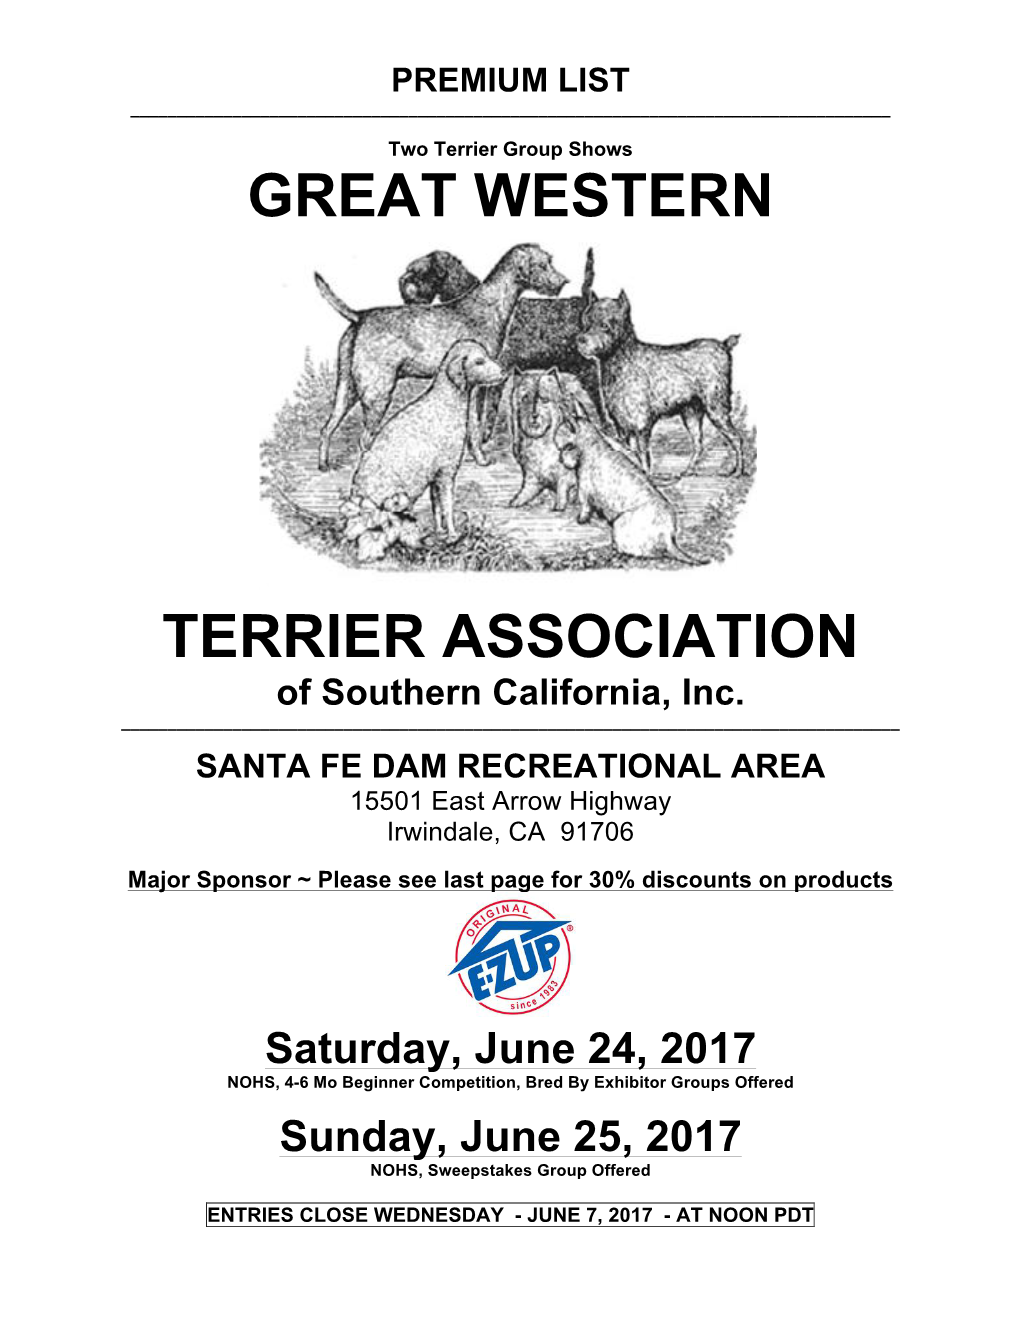 Great Western Terrier Association of Southern California, Inc